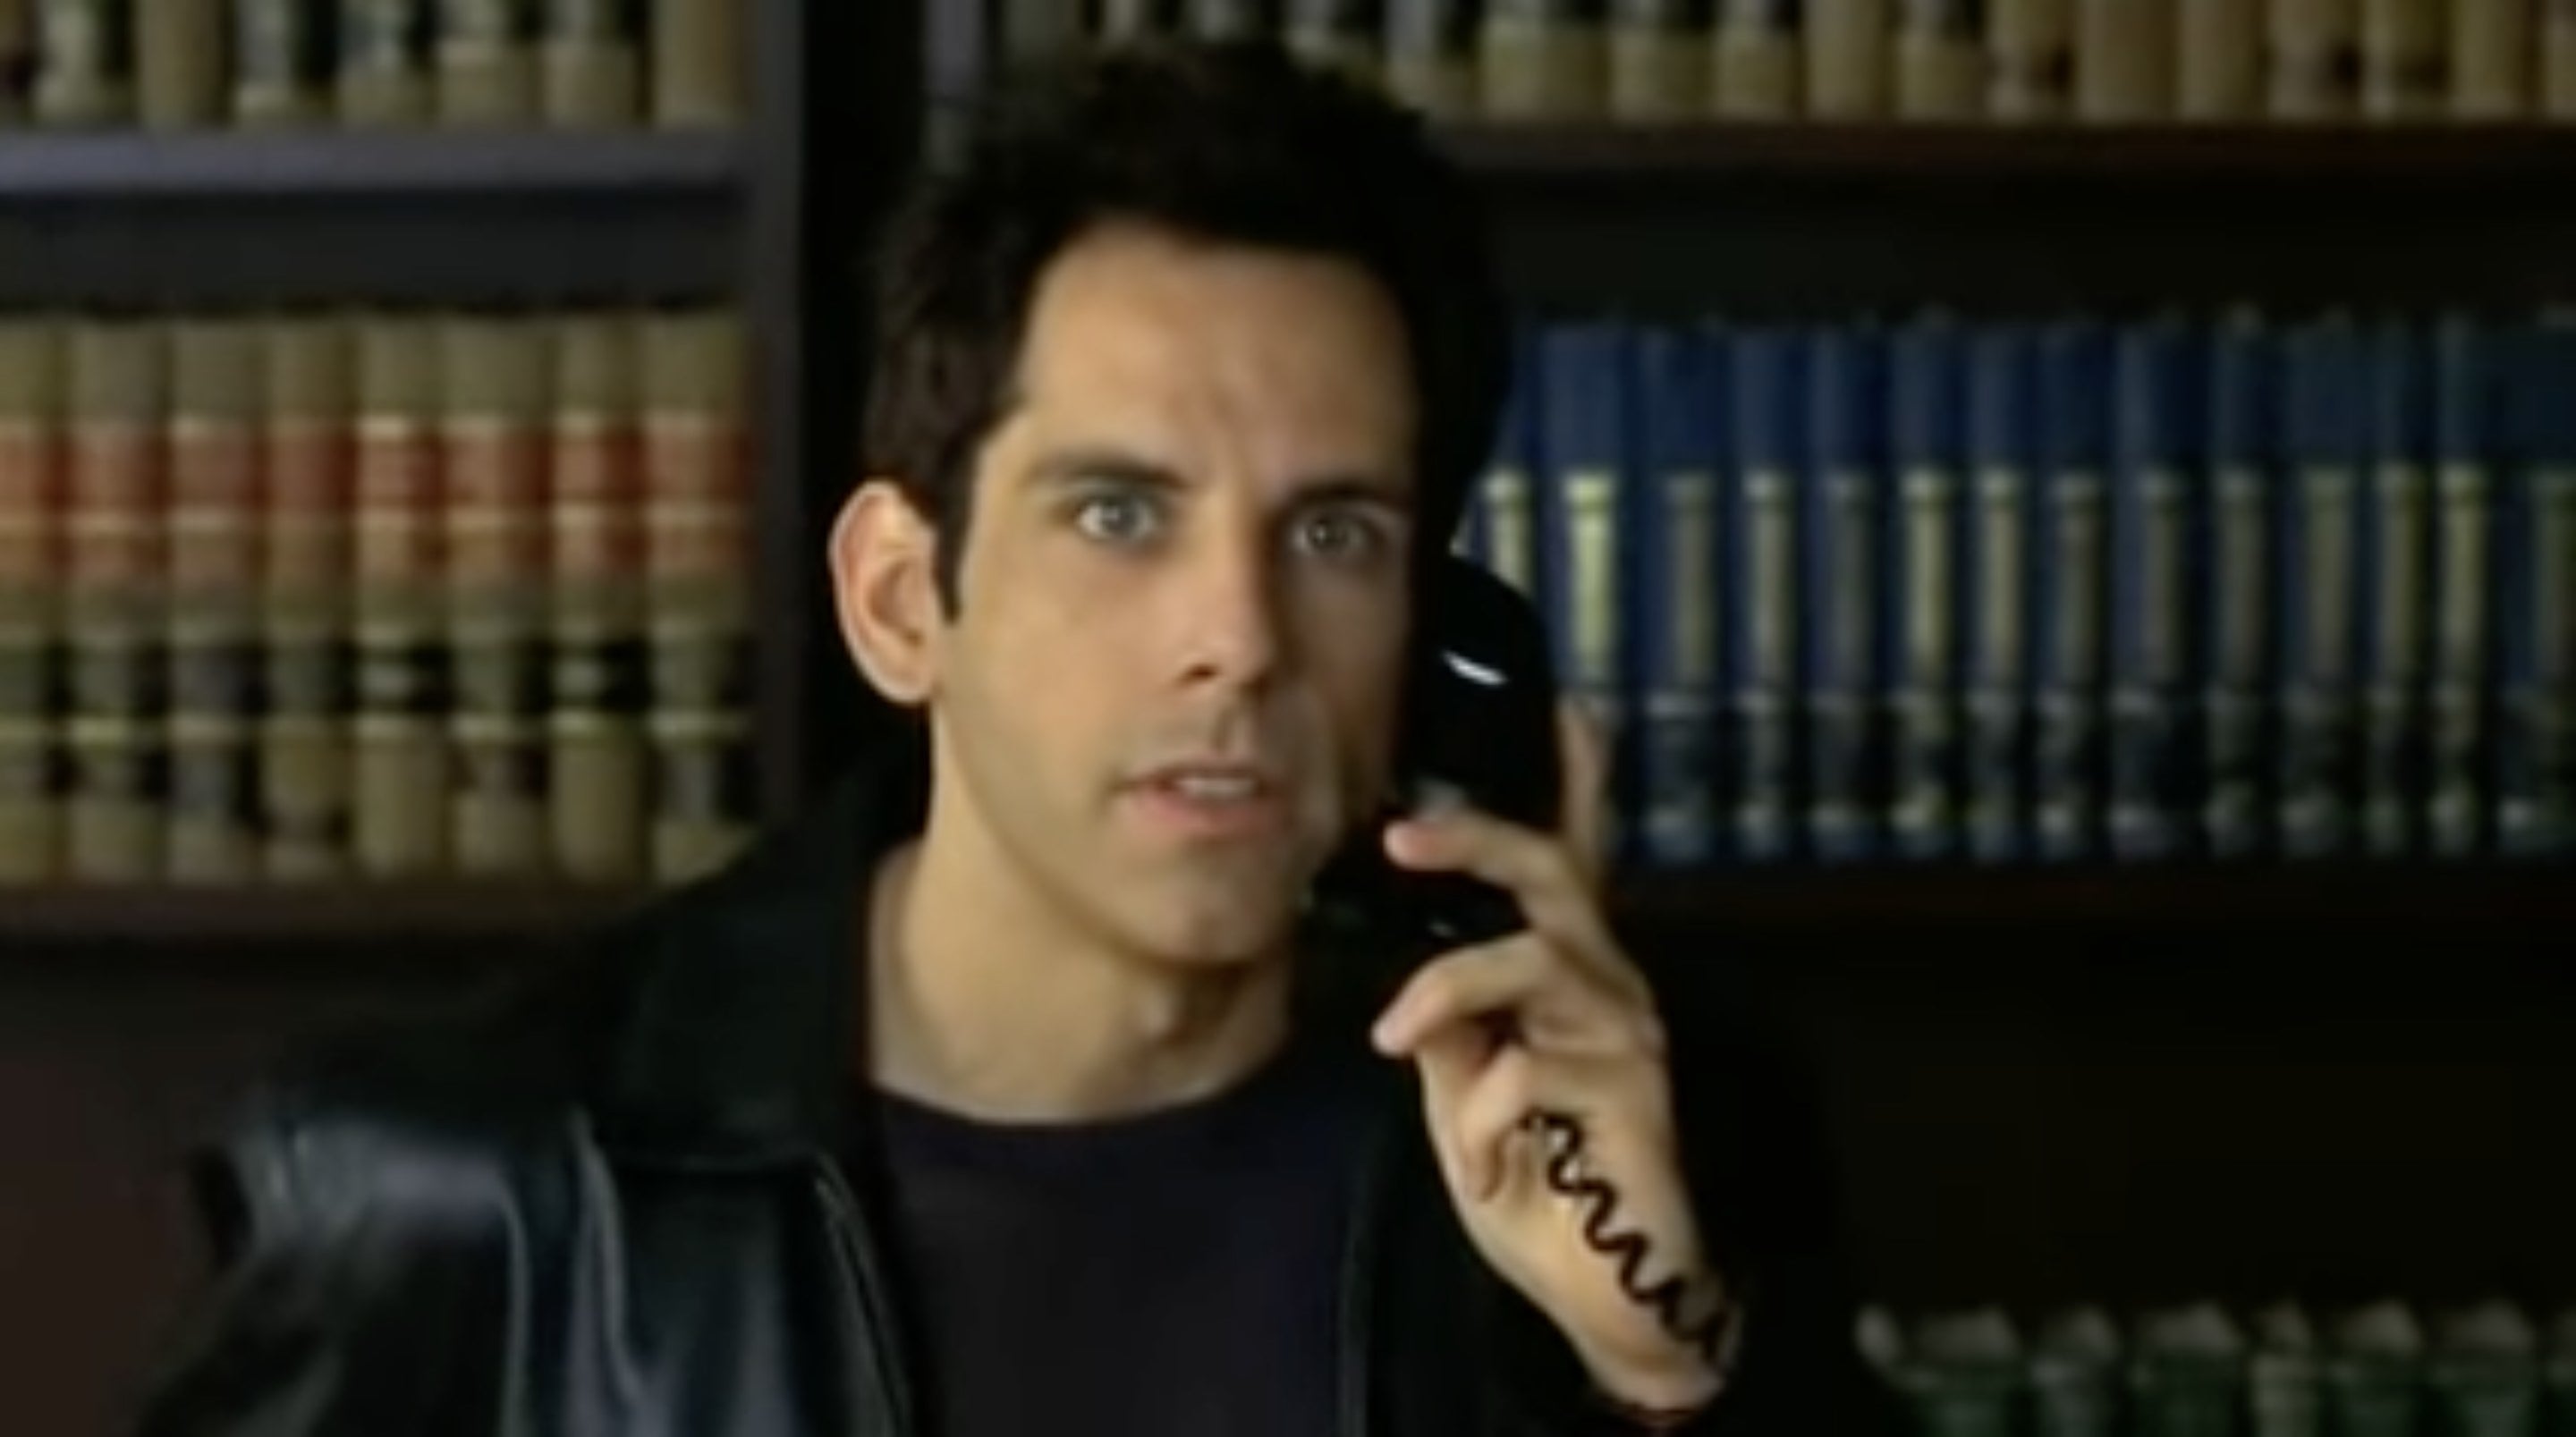 Man stares into camera while on the phone in &quot;Keeping the Faith&quot;